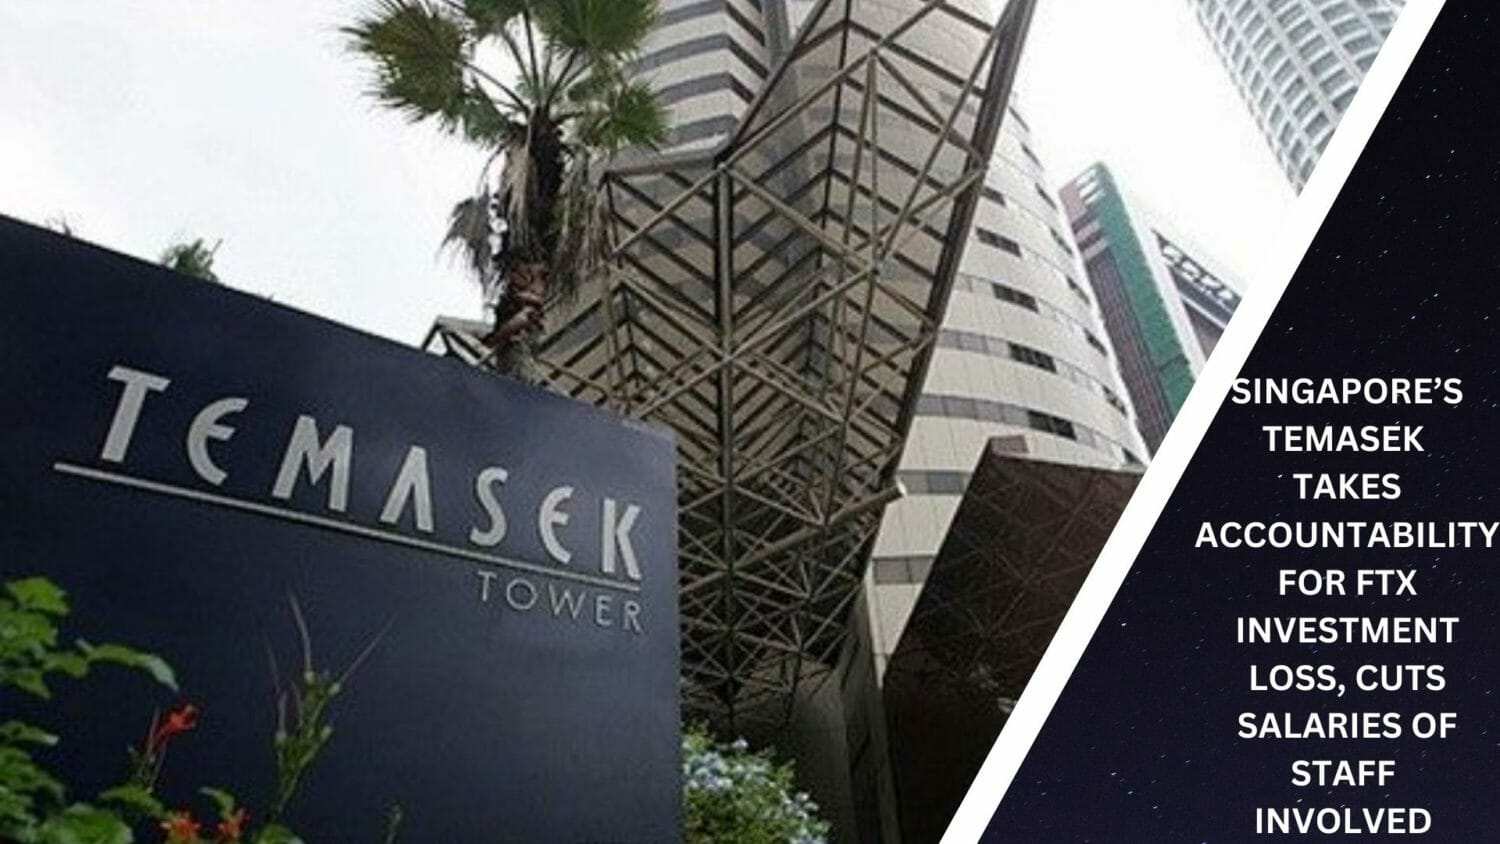 Singapore’s Temasek Takes Accountability For Ftx Investment Loss, Cuts Salaries Of Staff Involved